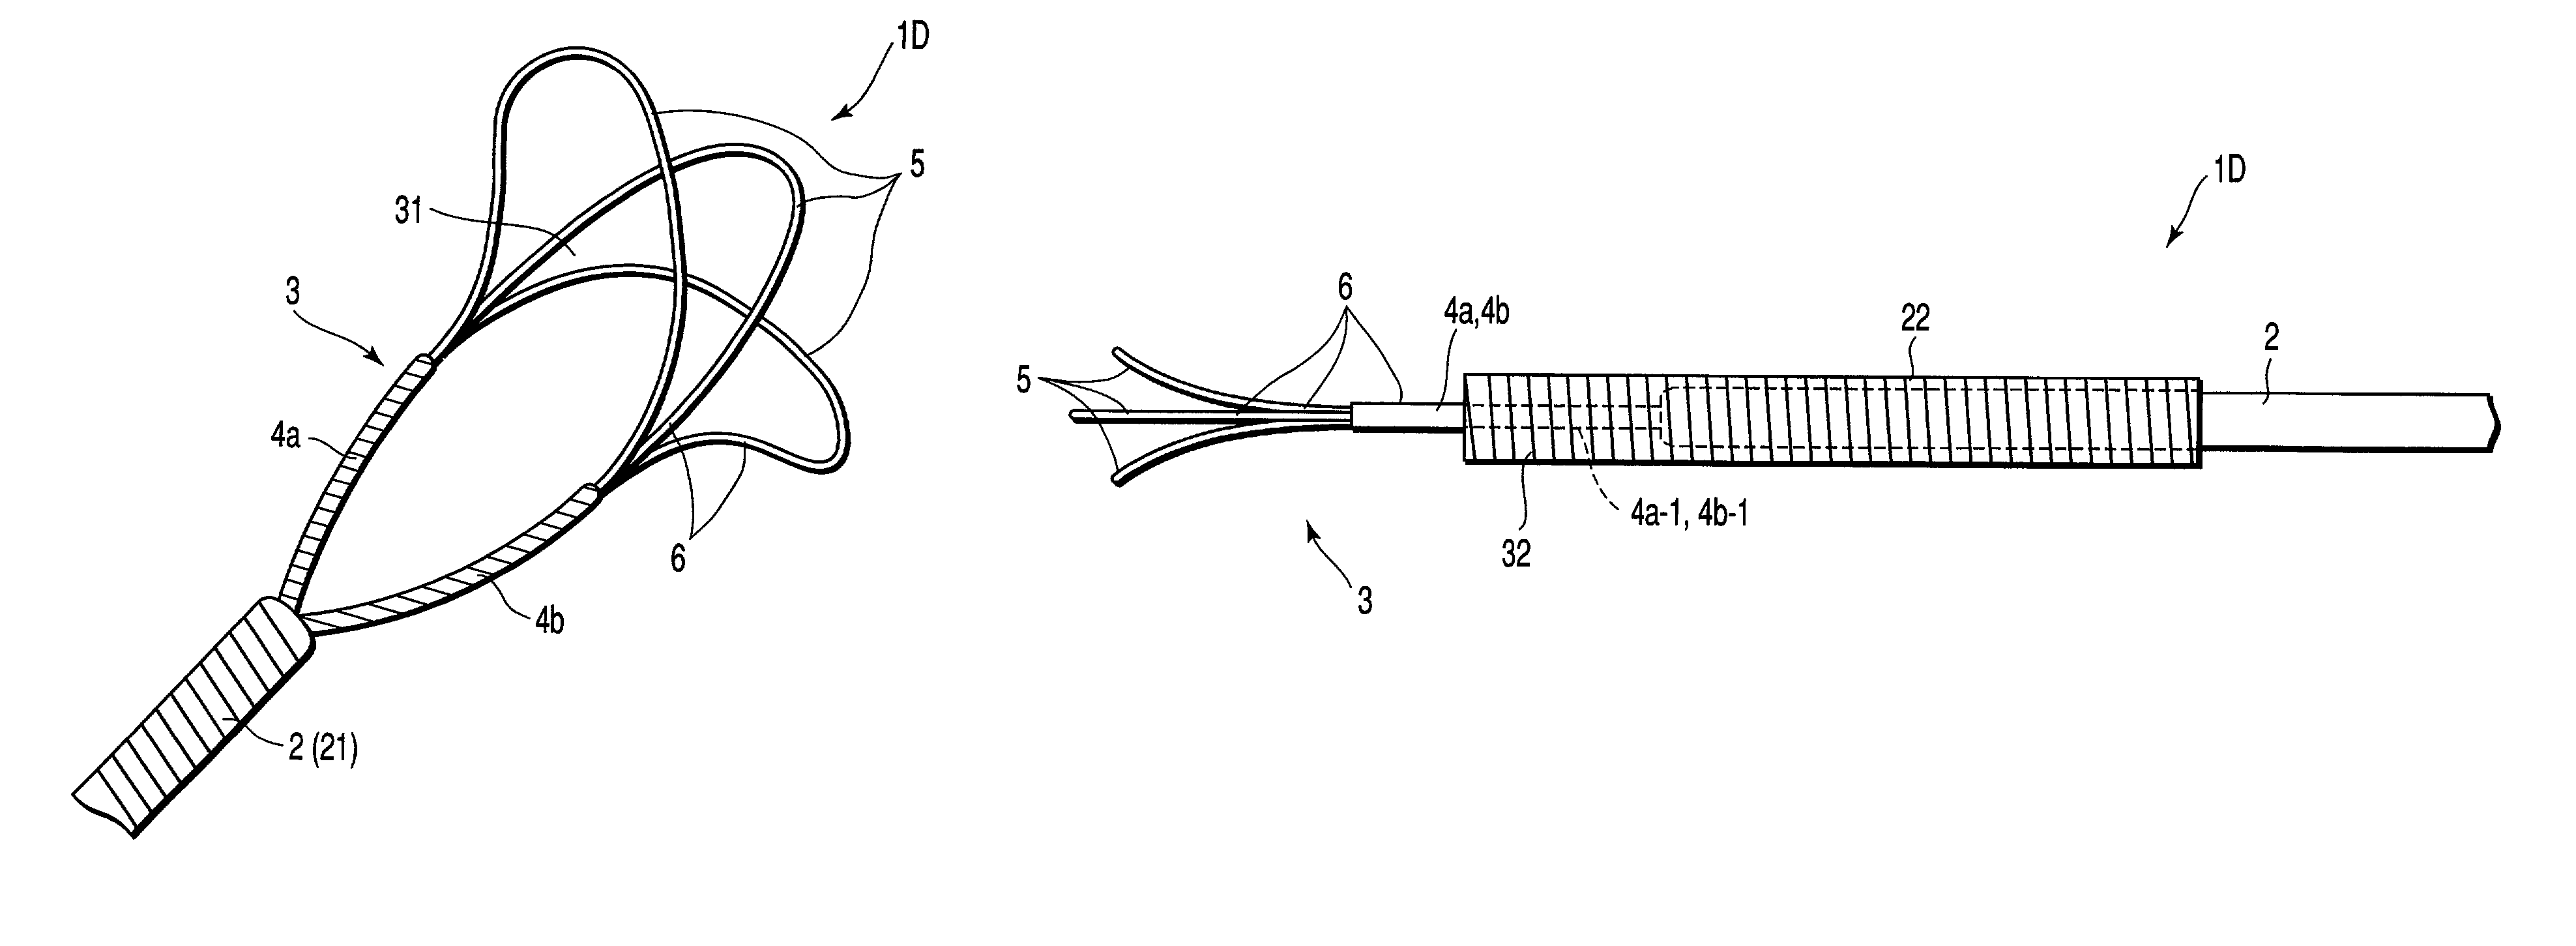 Intravascular obstruction removing wire and medical instrument